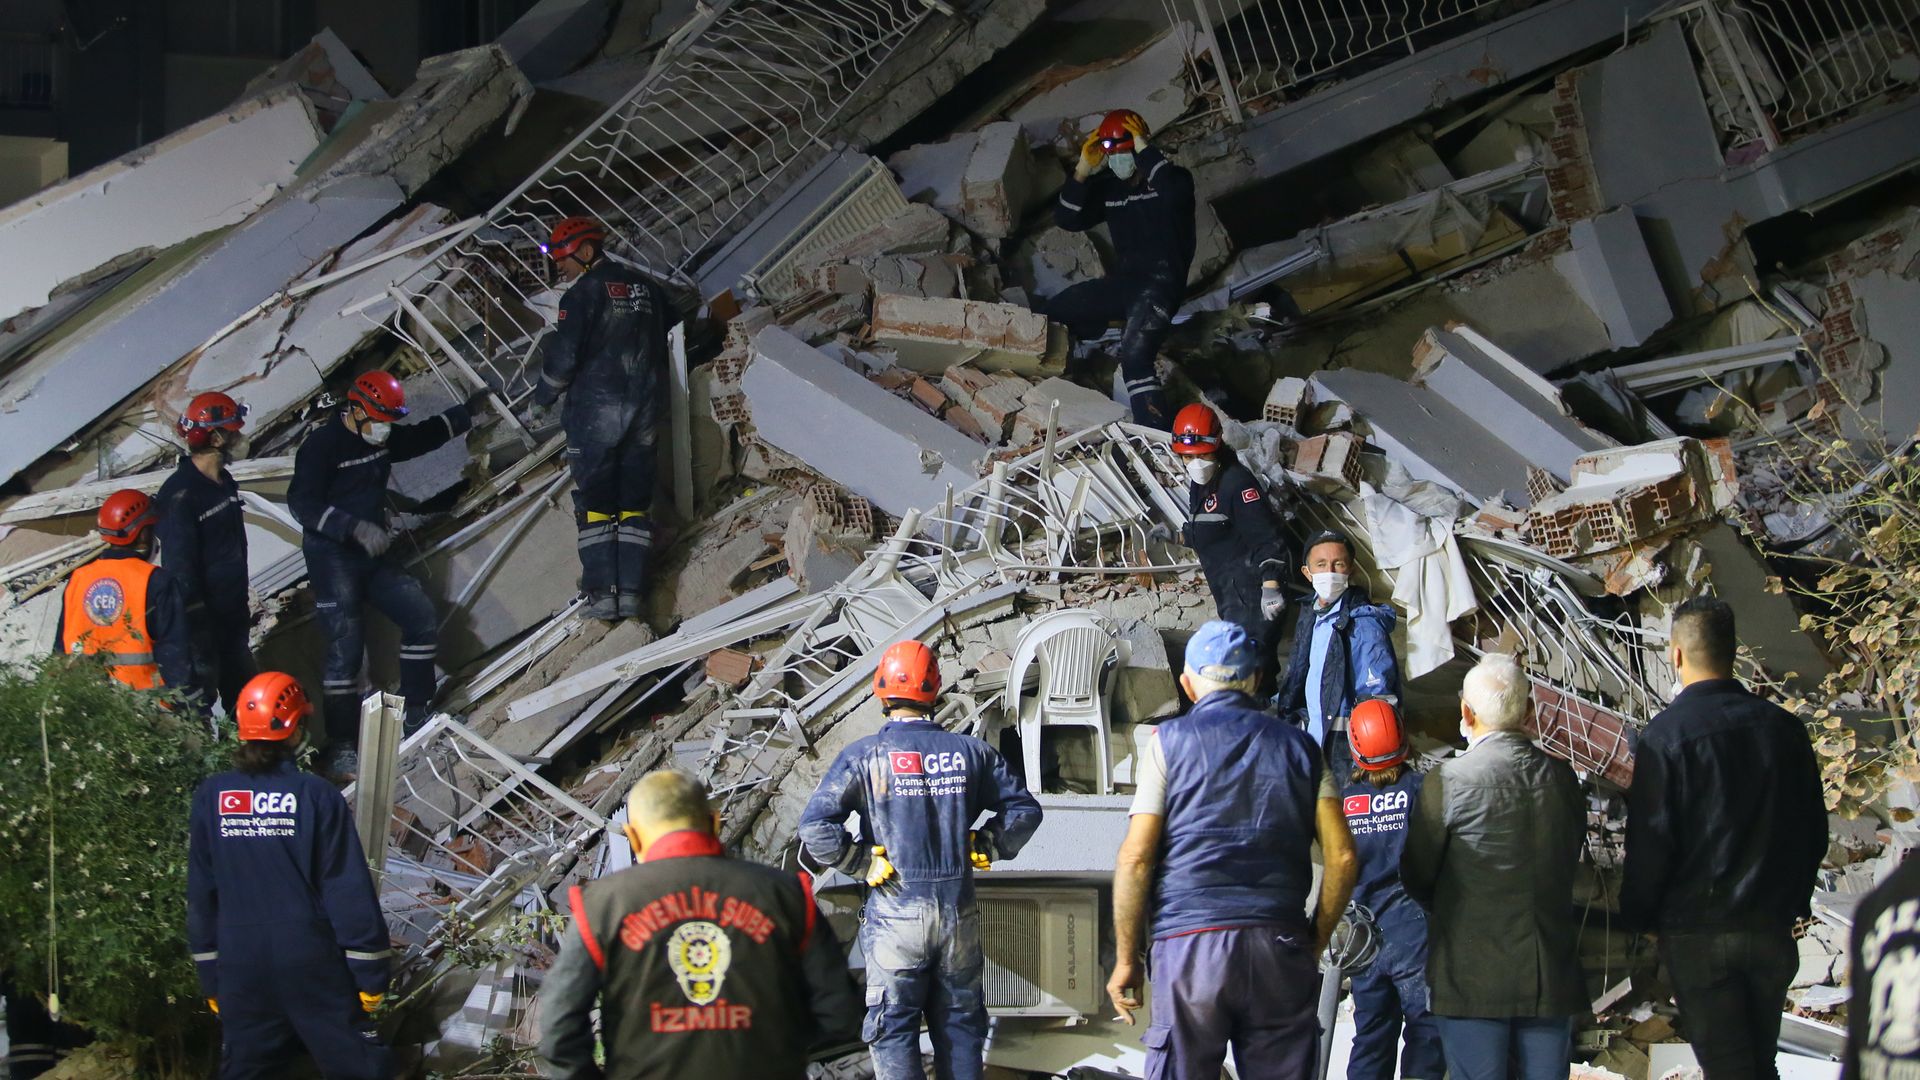 Search and rescue workers searching the debris of buildings in Izmir, Turkey, on Oct. 30.